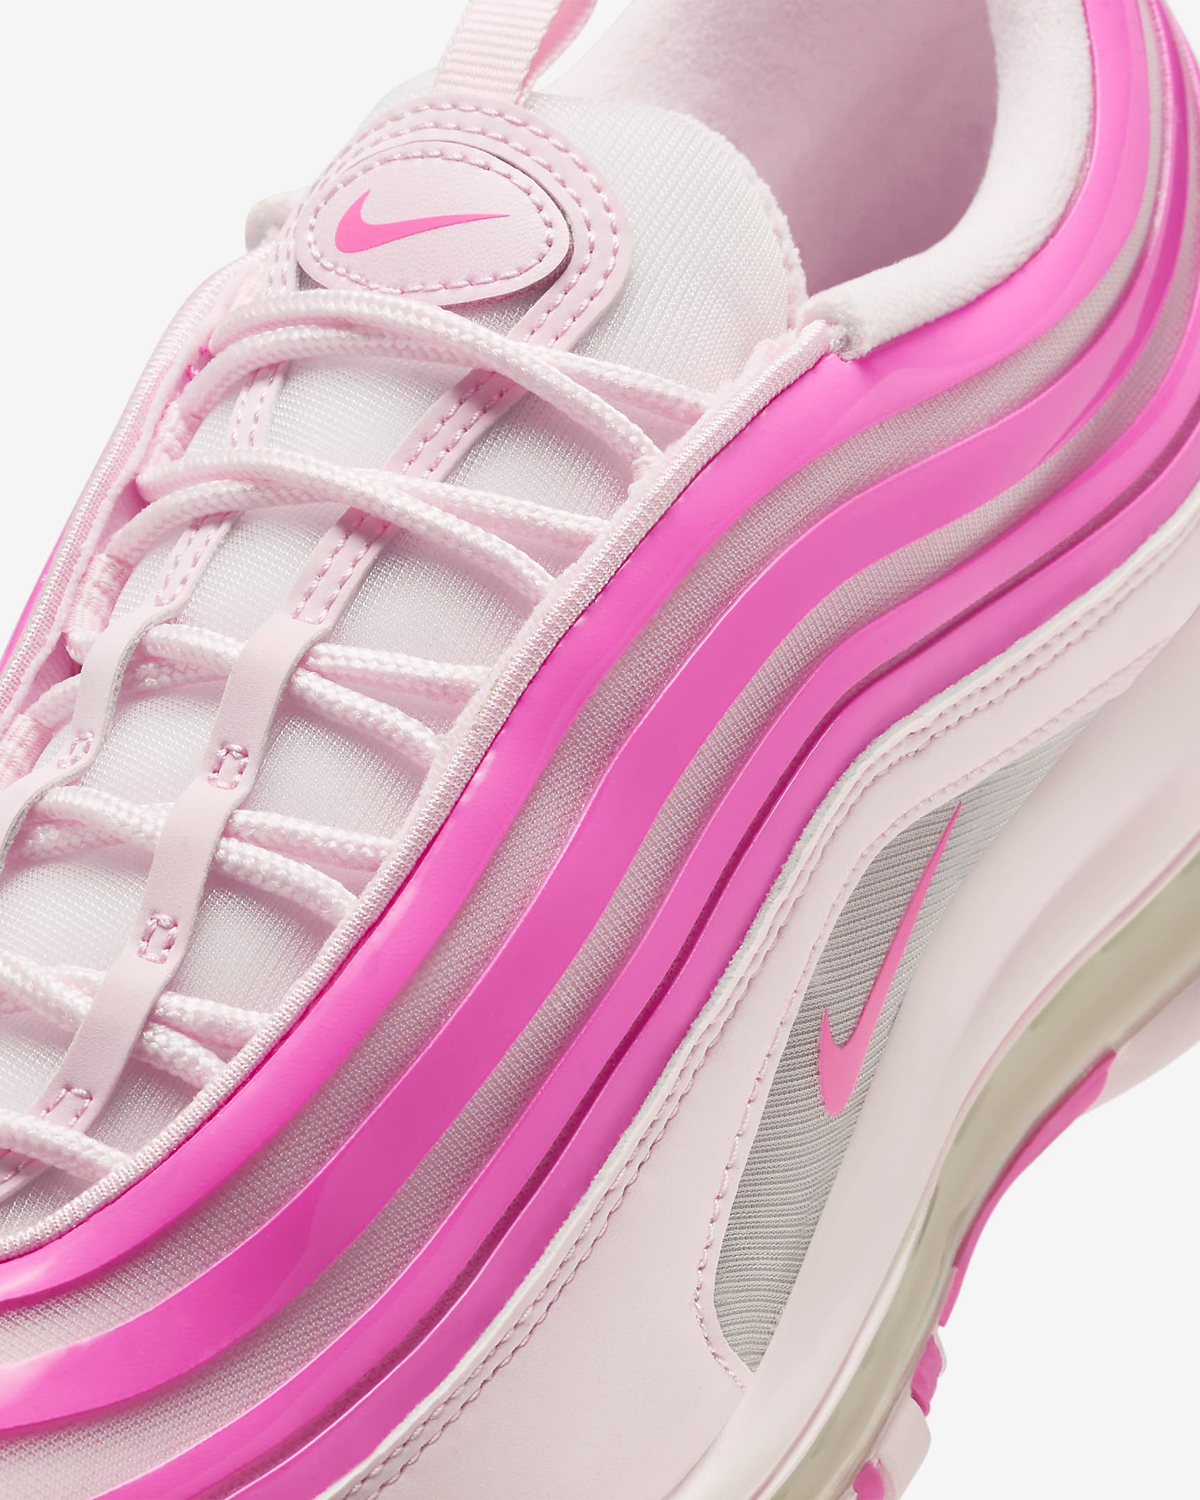 nike ones Air Max 97 Pink Foam Playful Pink Release Date 7